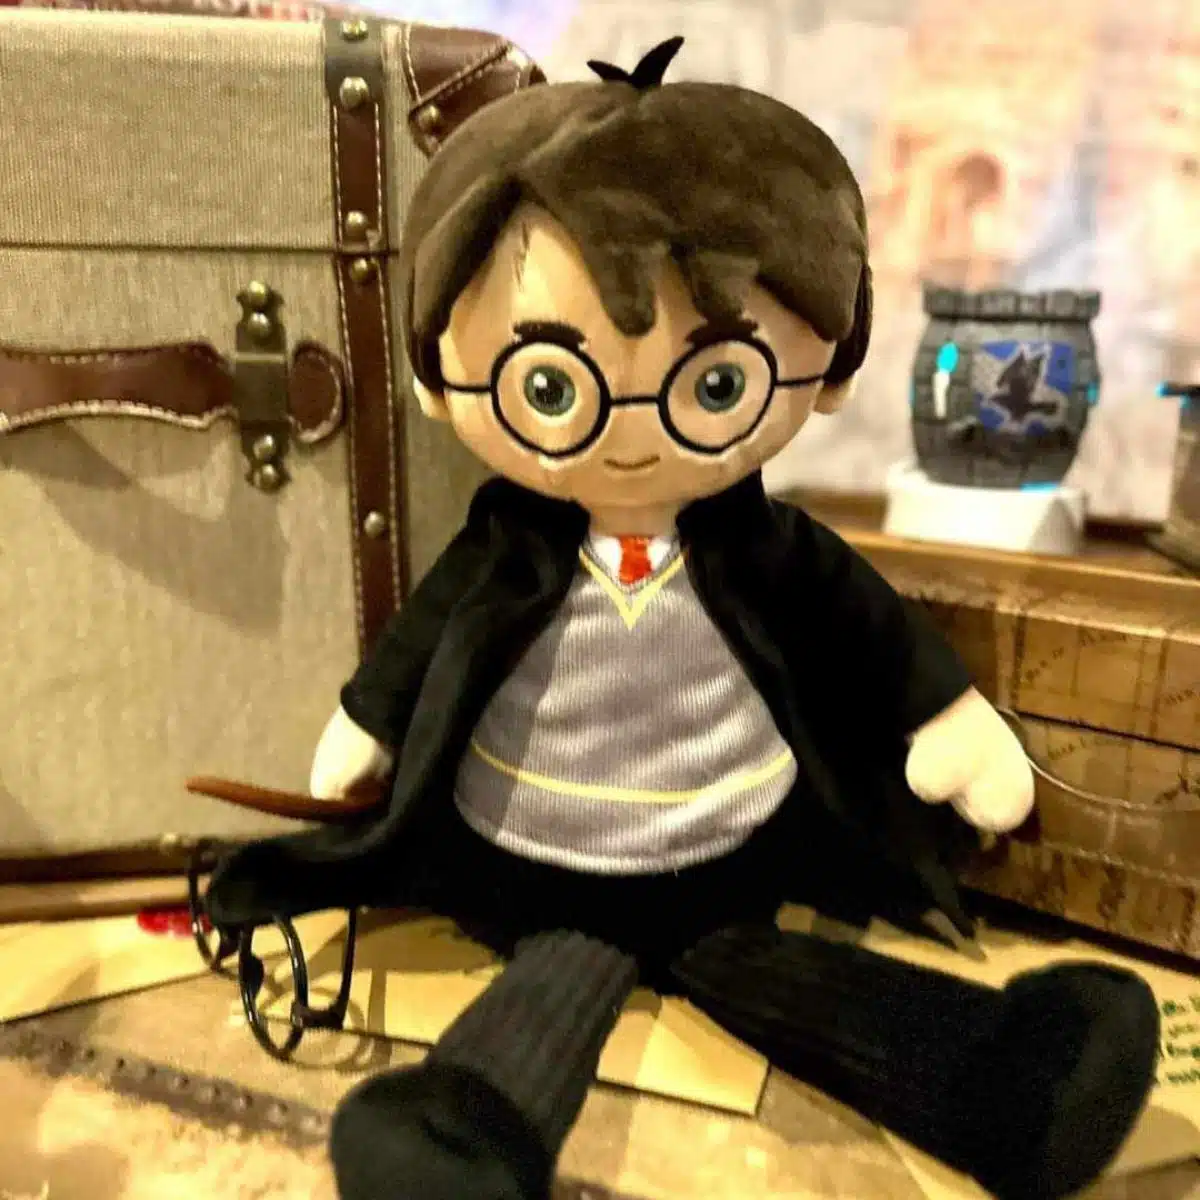 Harry Potter™ Scentsy Buddy - The Candle Boutique - Scentsy UK Consultant